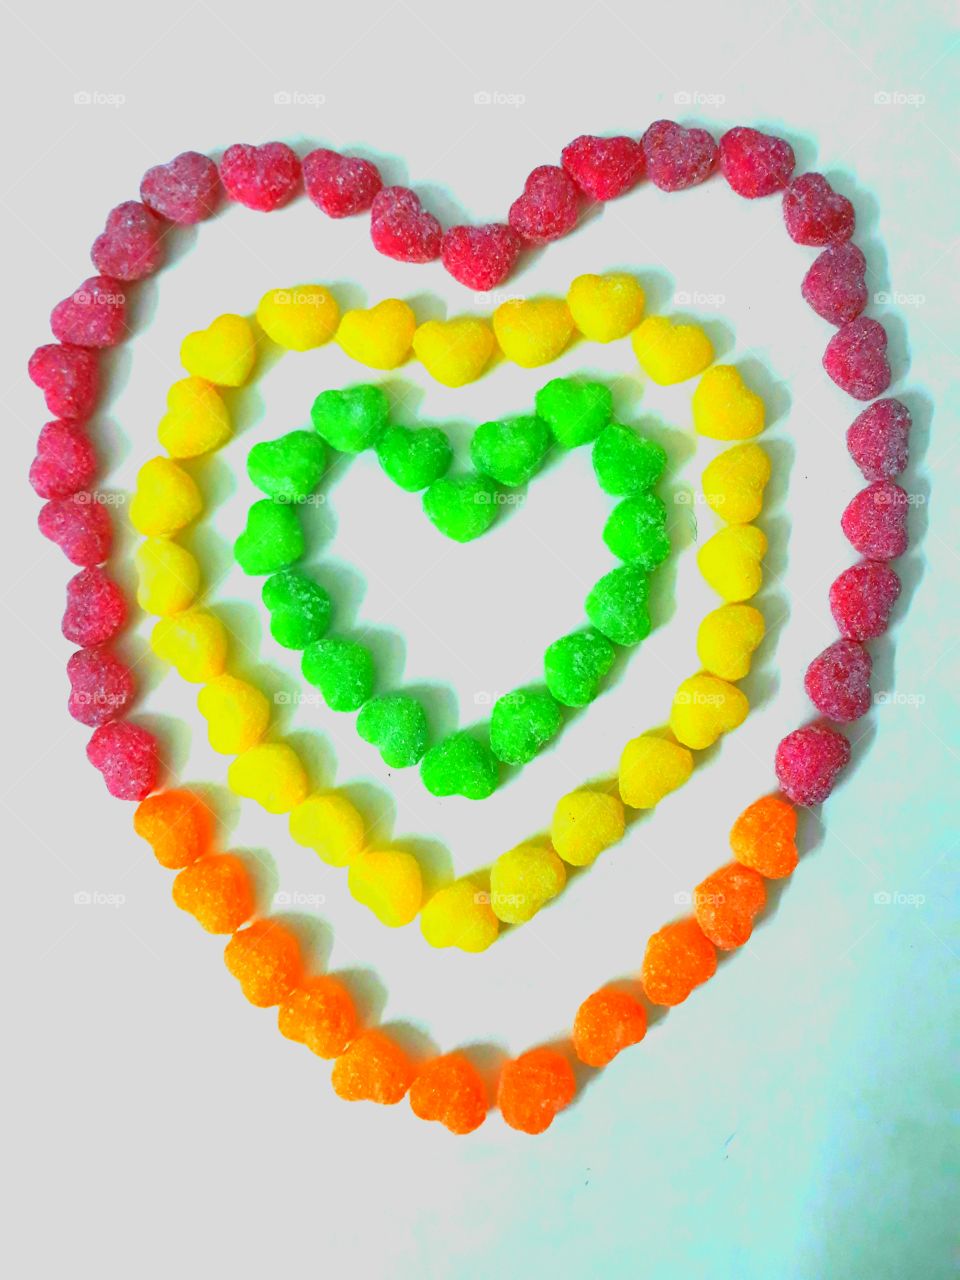 in love with Candys ..💗